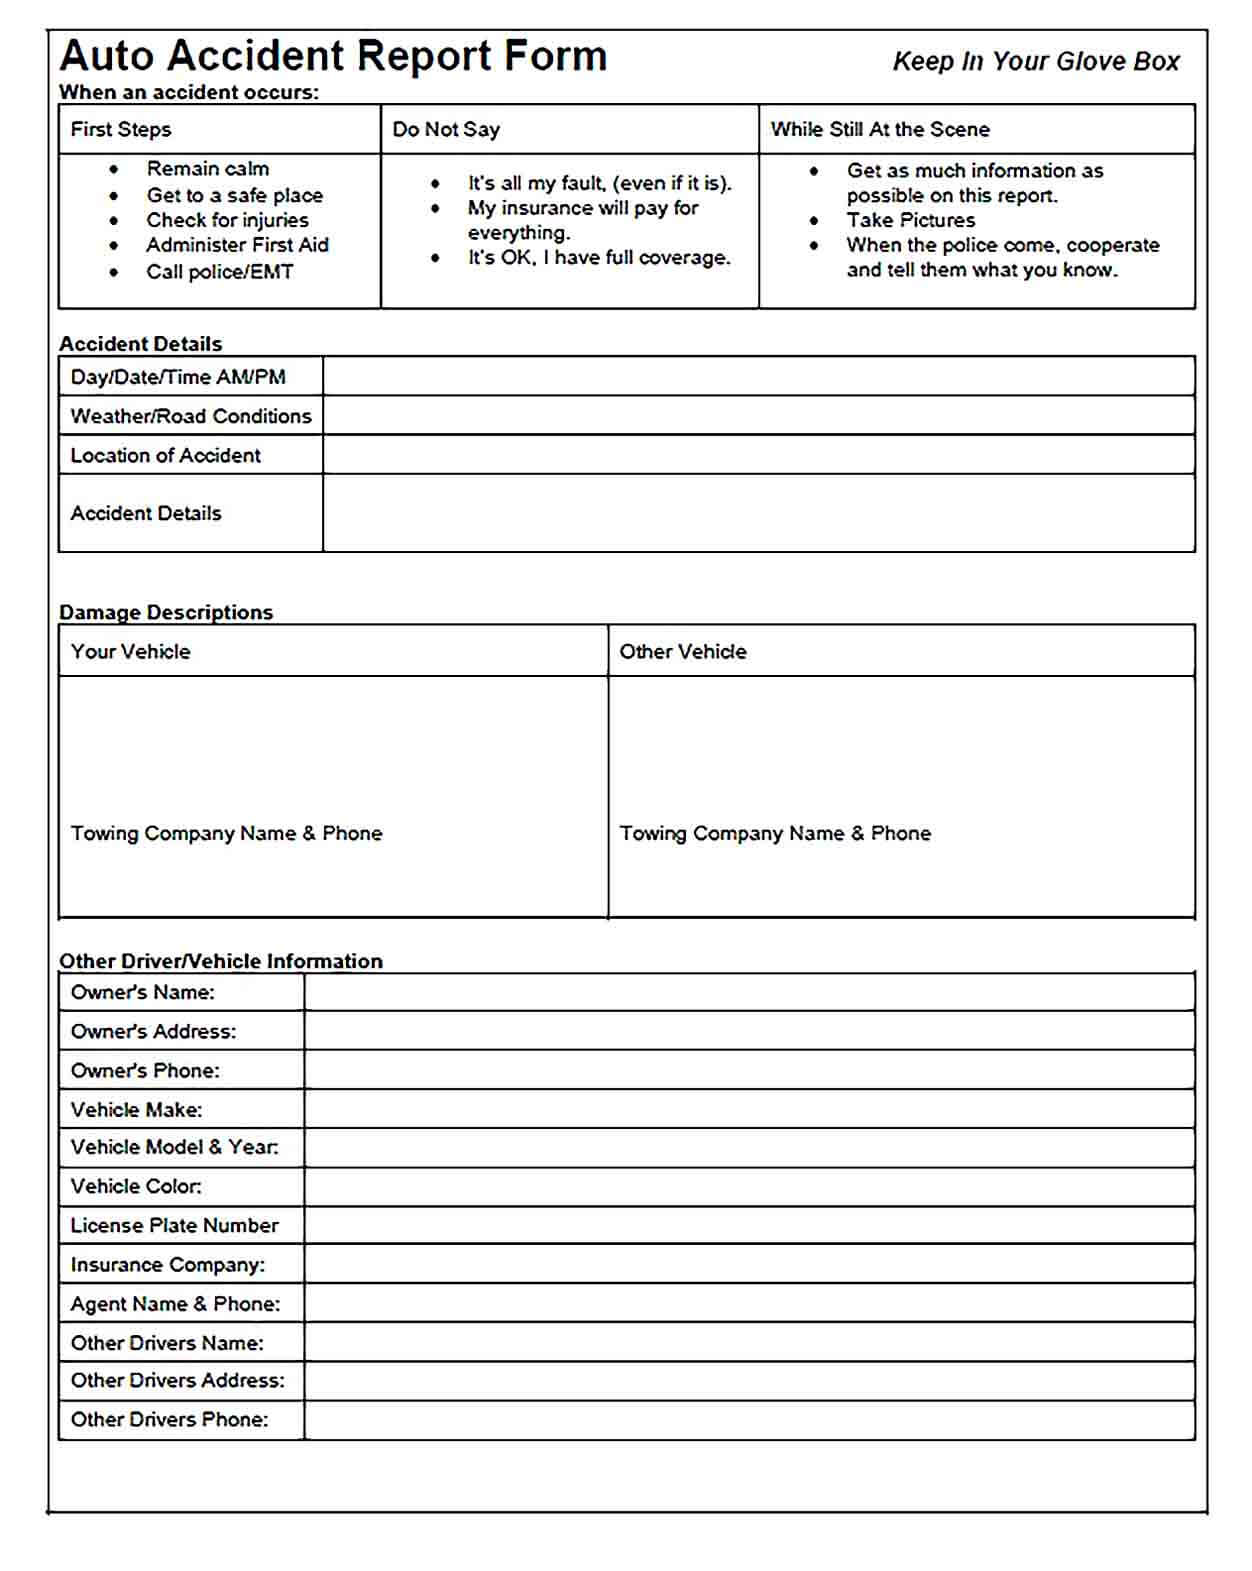 Sample Auto Accident Report Template